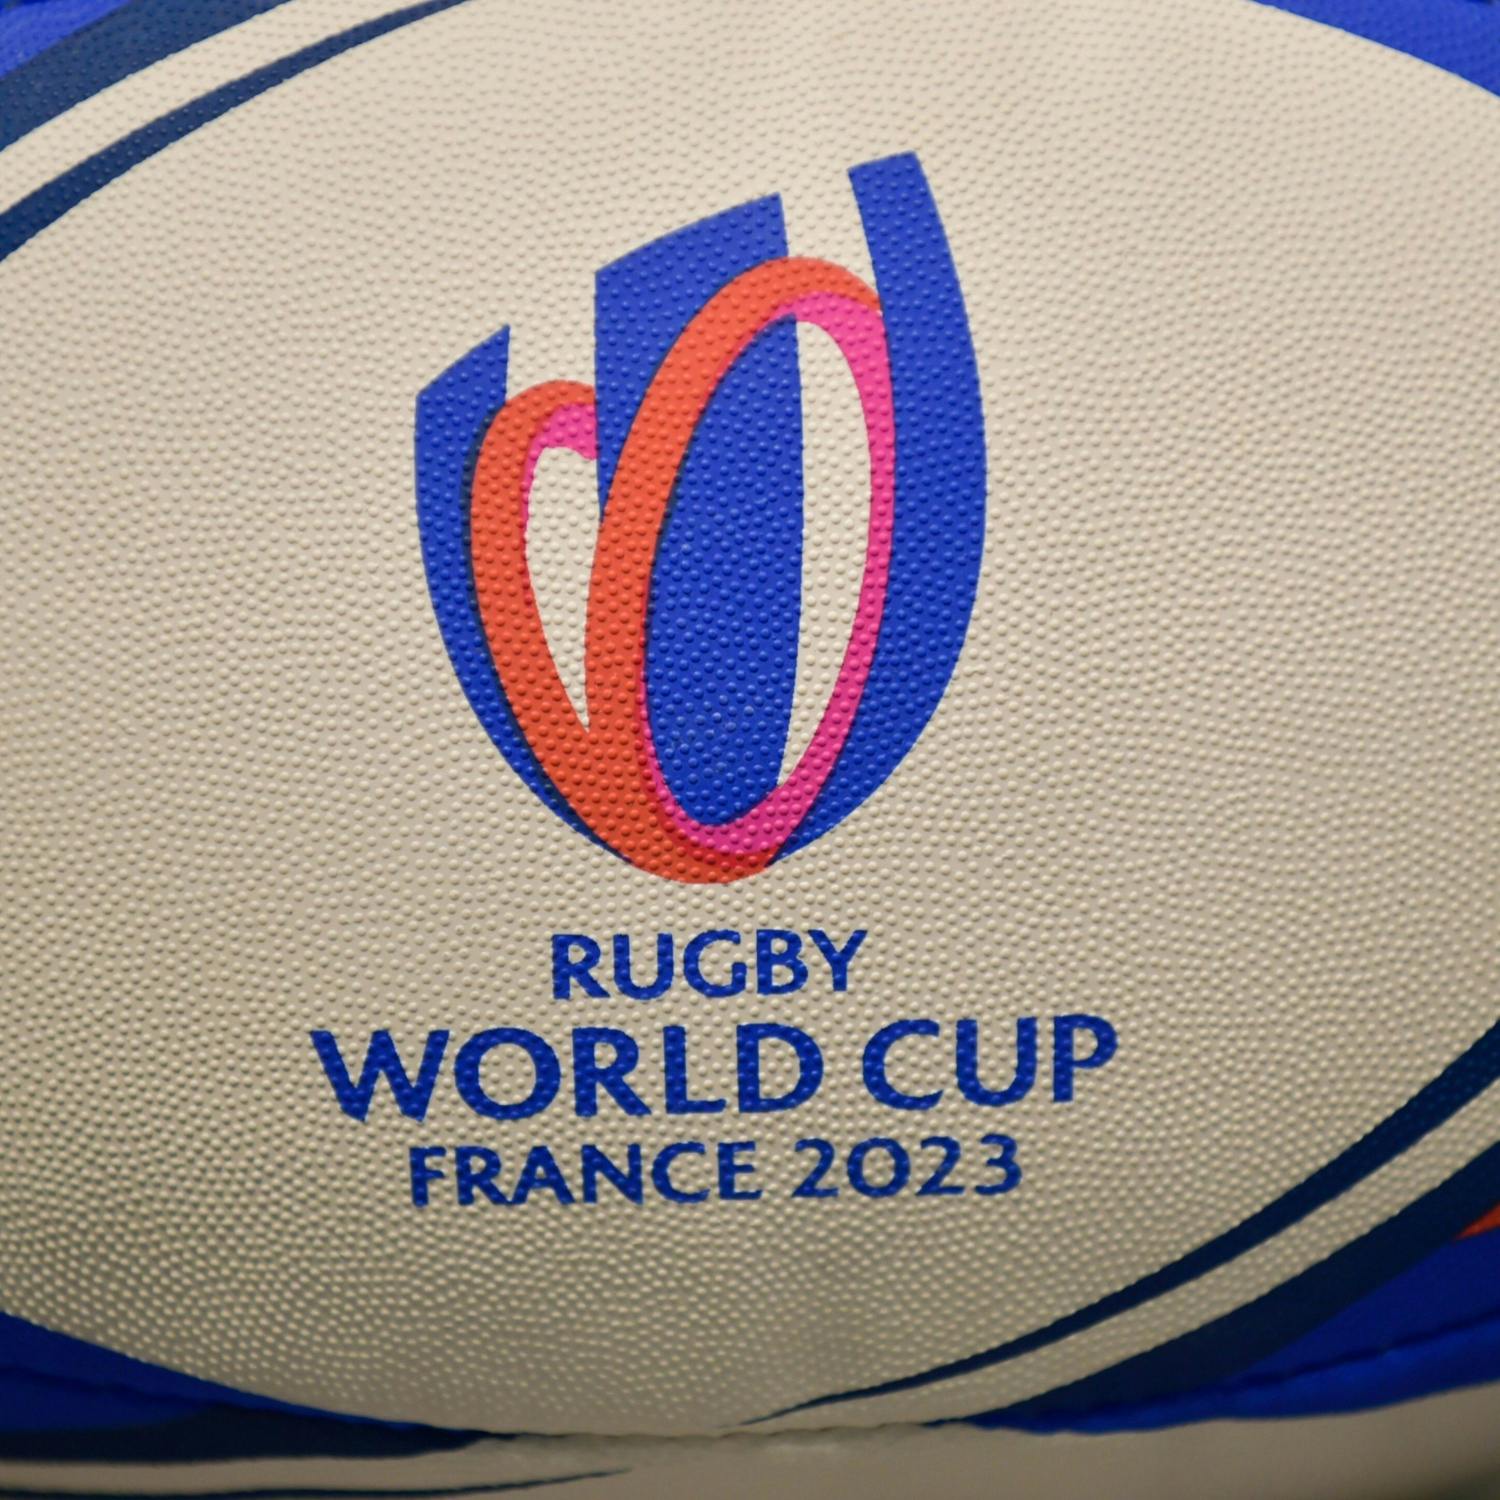 We're Kicking Off Our Rugby World Cup Coverage